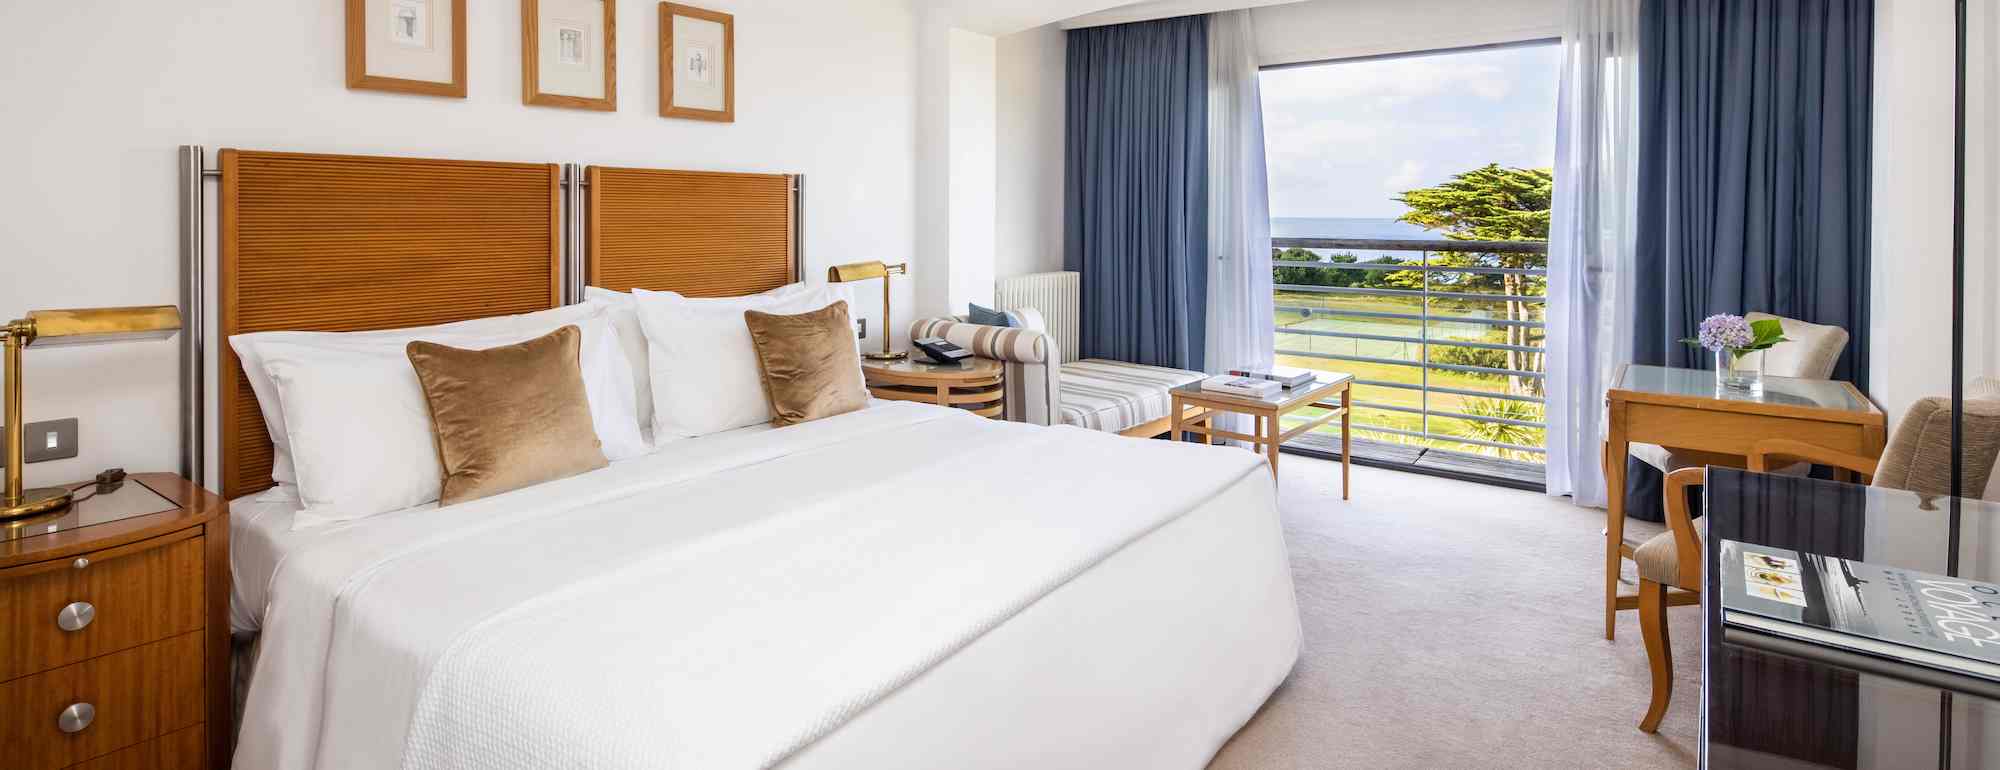 luxury-accommodation-in-jersey-the-atlantic-hotel-jersey